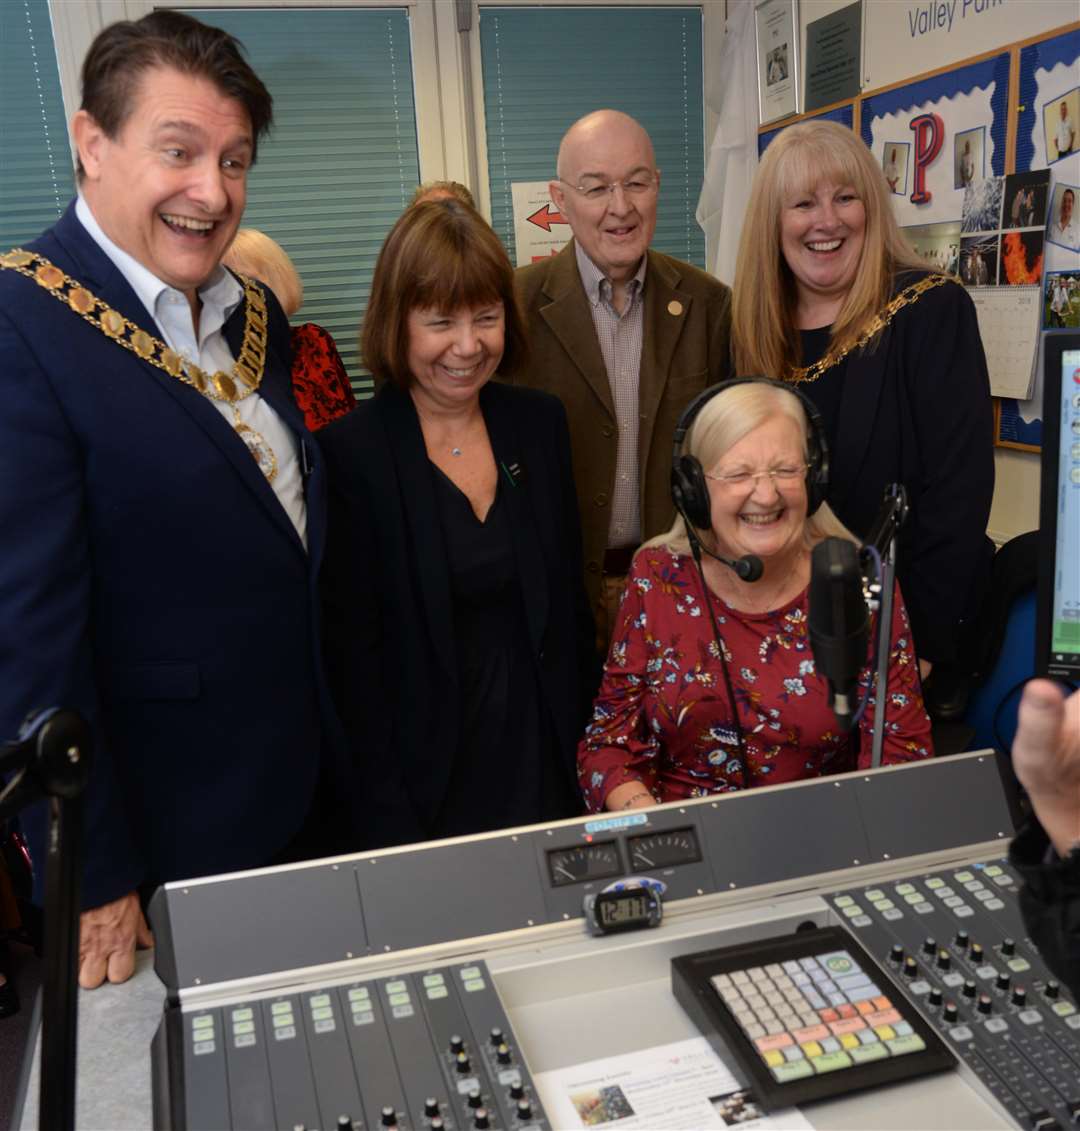 The new Valley Park Radio studio at Darenth Valley Hospital was opened by the Mayor Cllr David Moat, picture Chris Davey. (5704735)